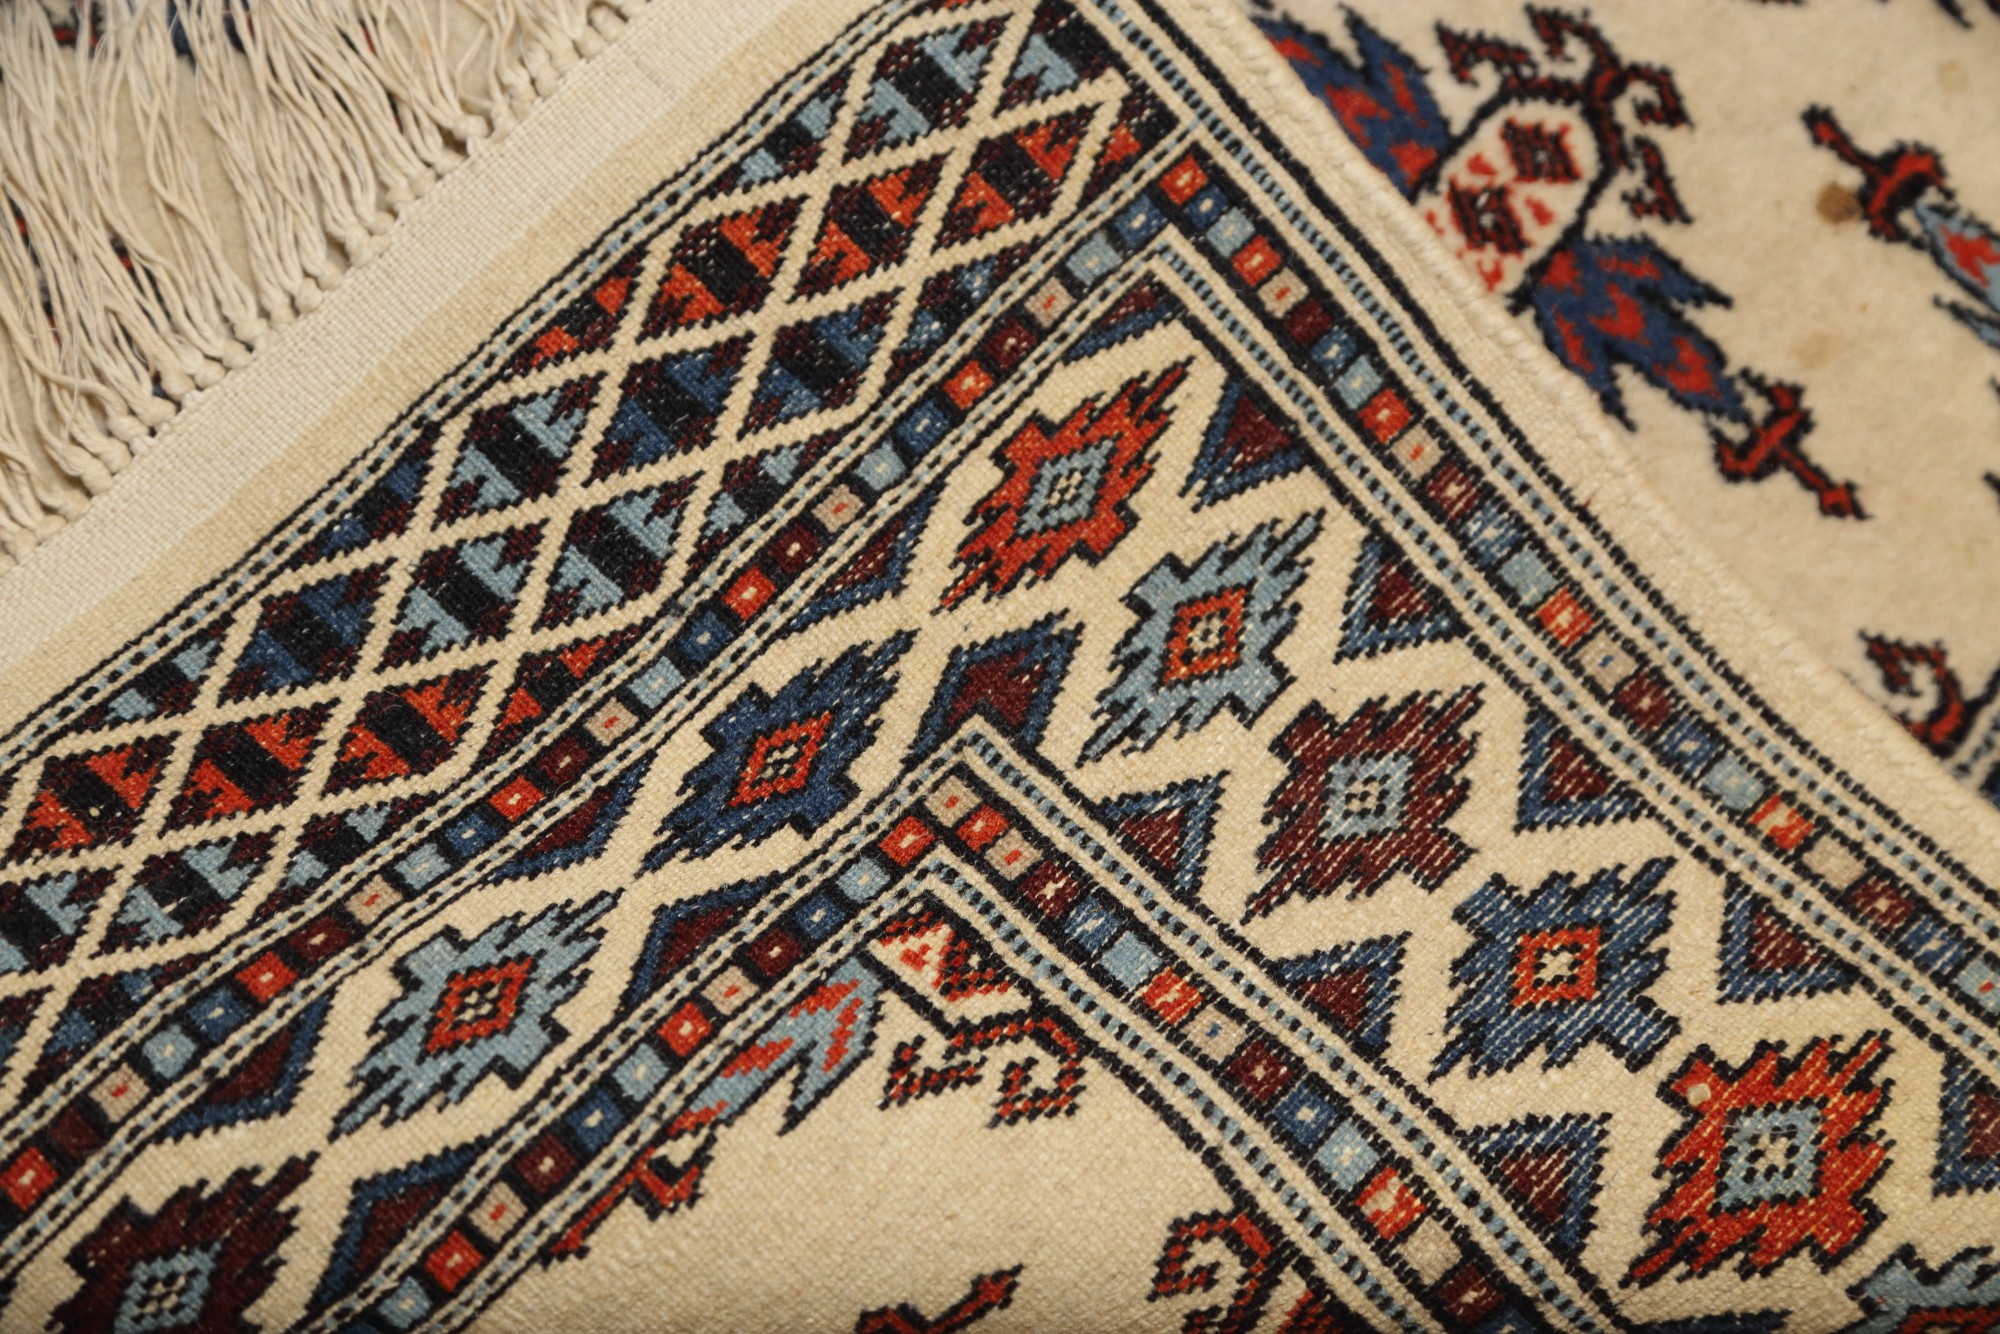 A Bokhara rug with twenty-nine hooked guls on a cream ground, 48" x 31" approx - Image 2 of 2